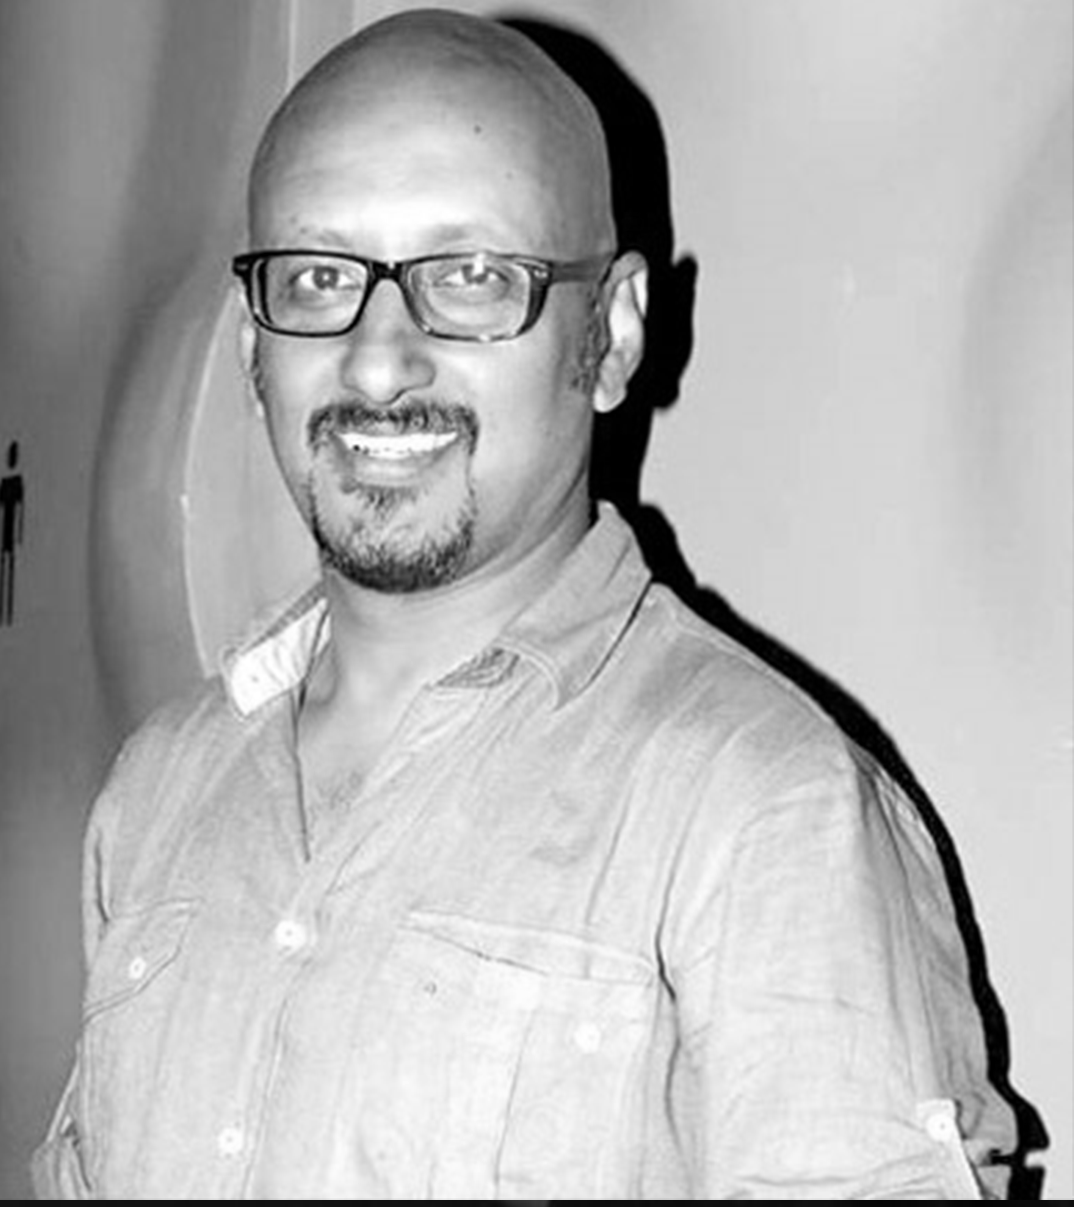 Shantanu Moitra - Score Composer & Musician, The National Film Awarded for Best Music Direction for Na Bangaaru Talli, All About Music virtual edition 2020